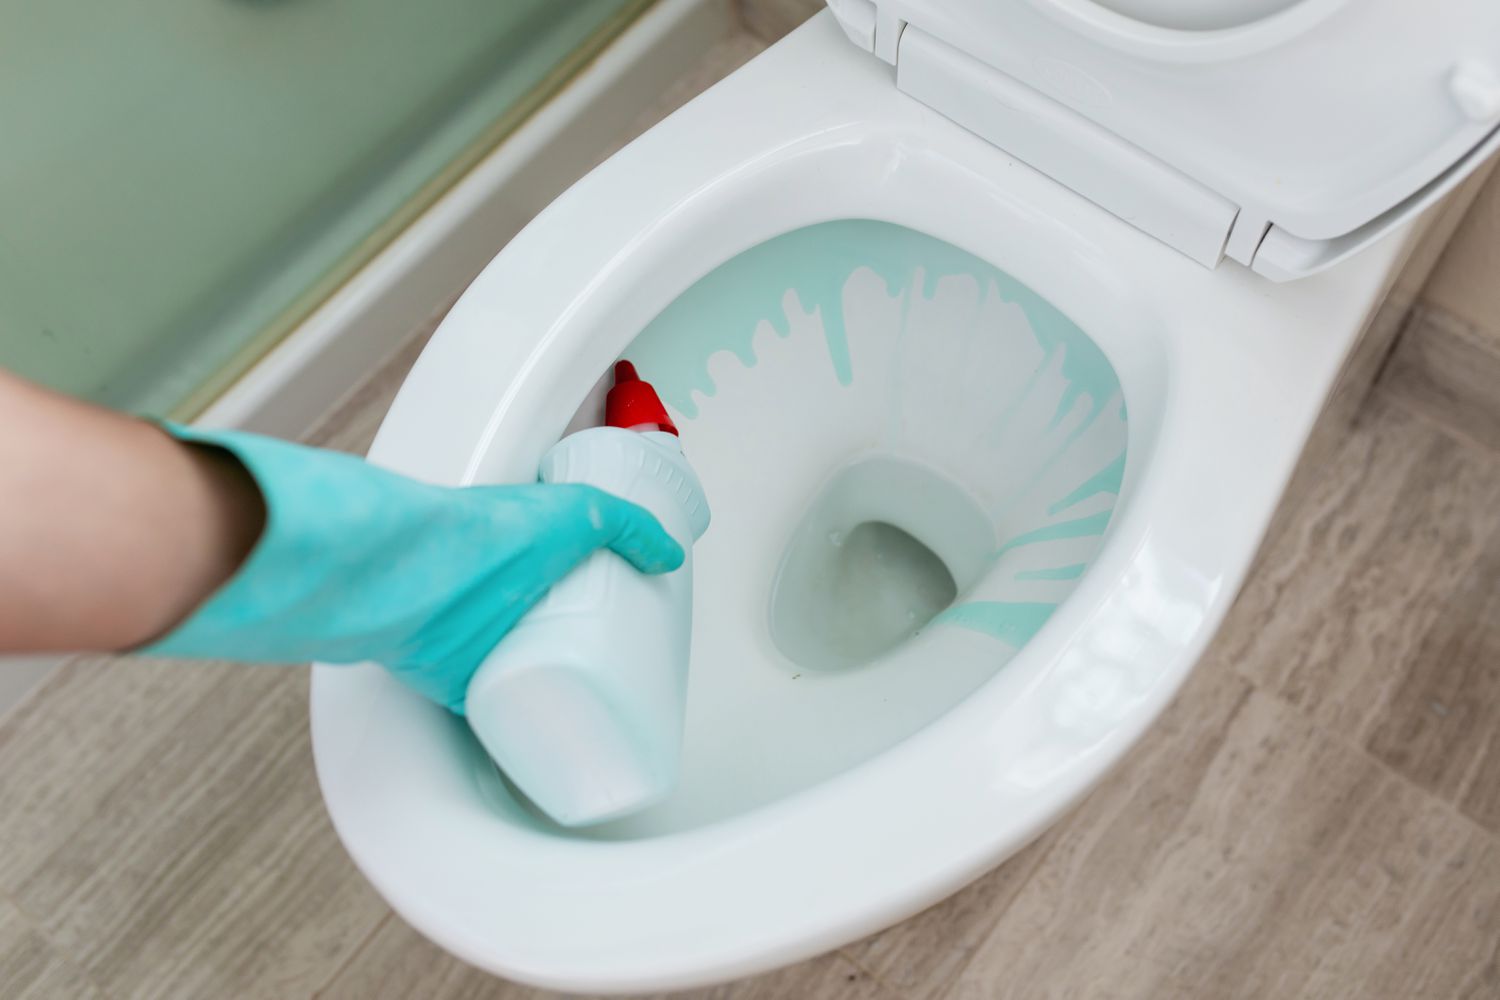 person using toilet bowl cleaner